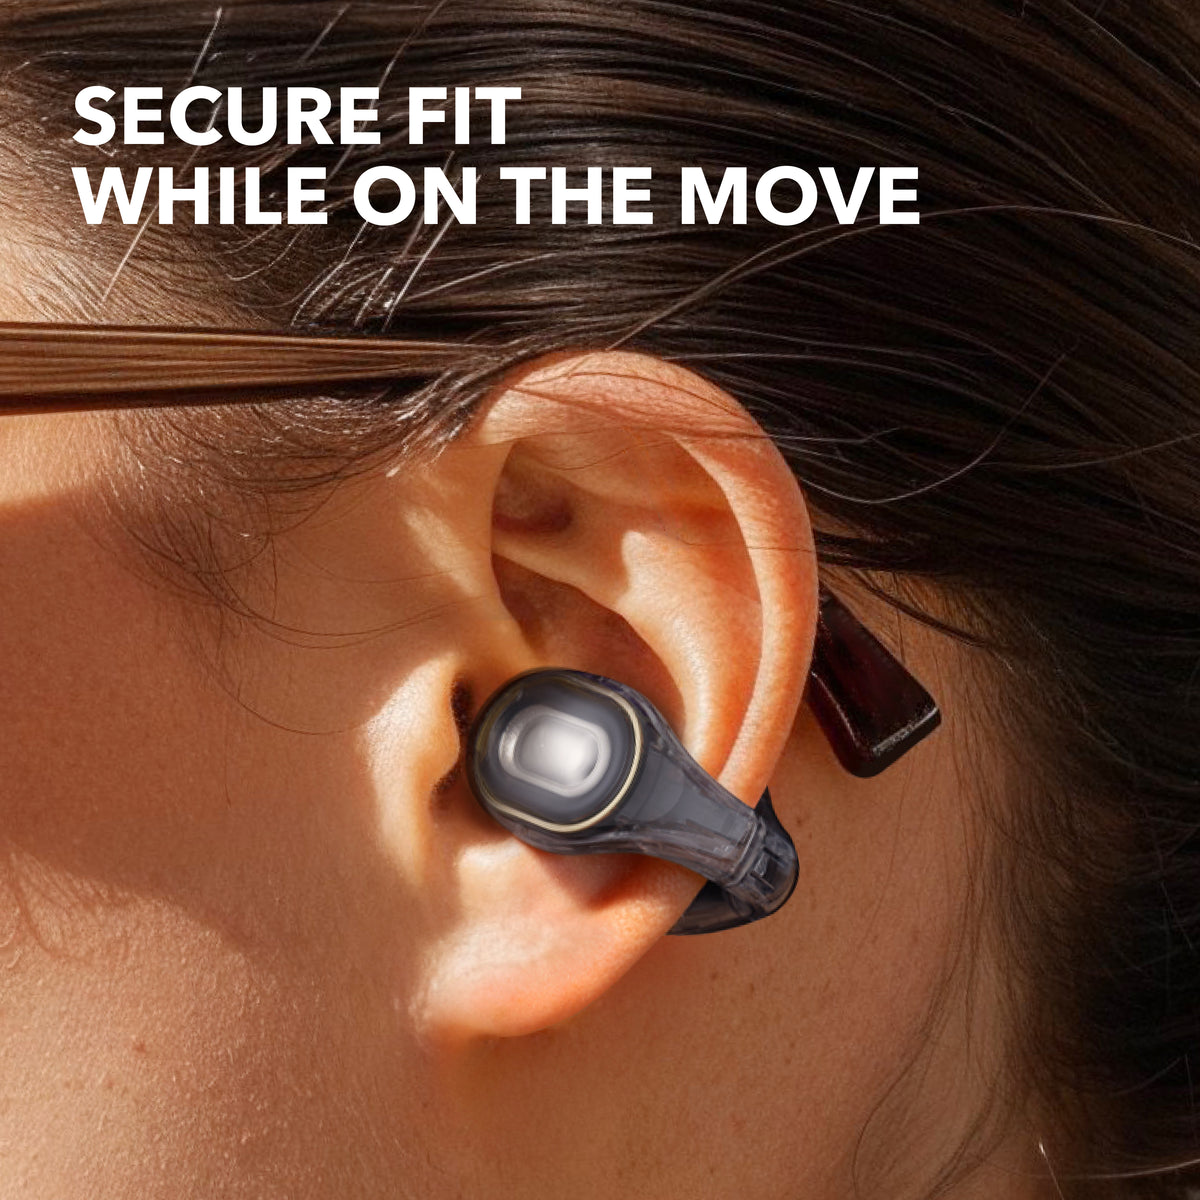 soundcore C30i |  Open-Ear Clip Earbuds with Secure Fit